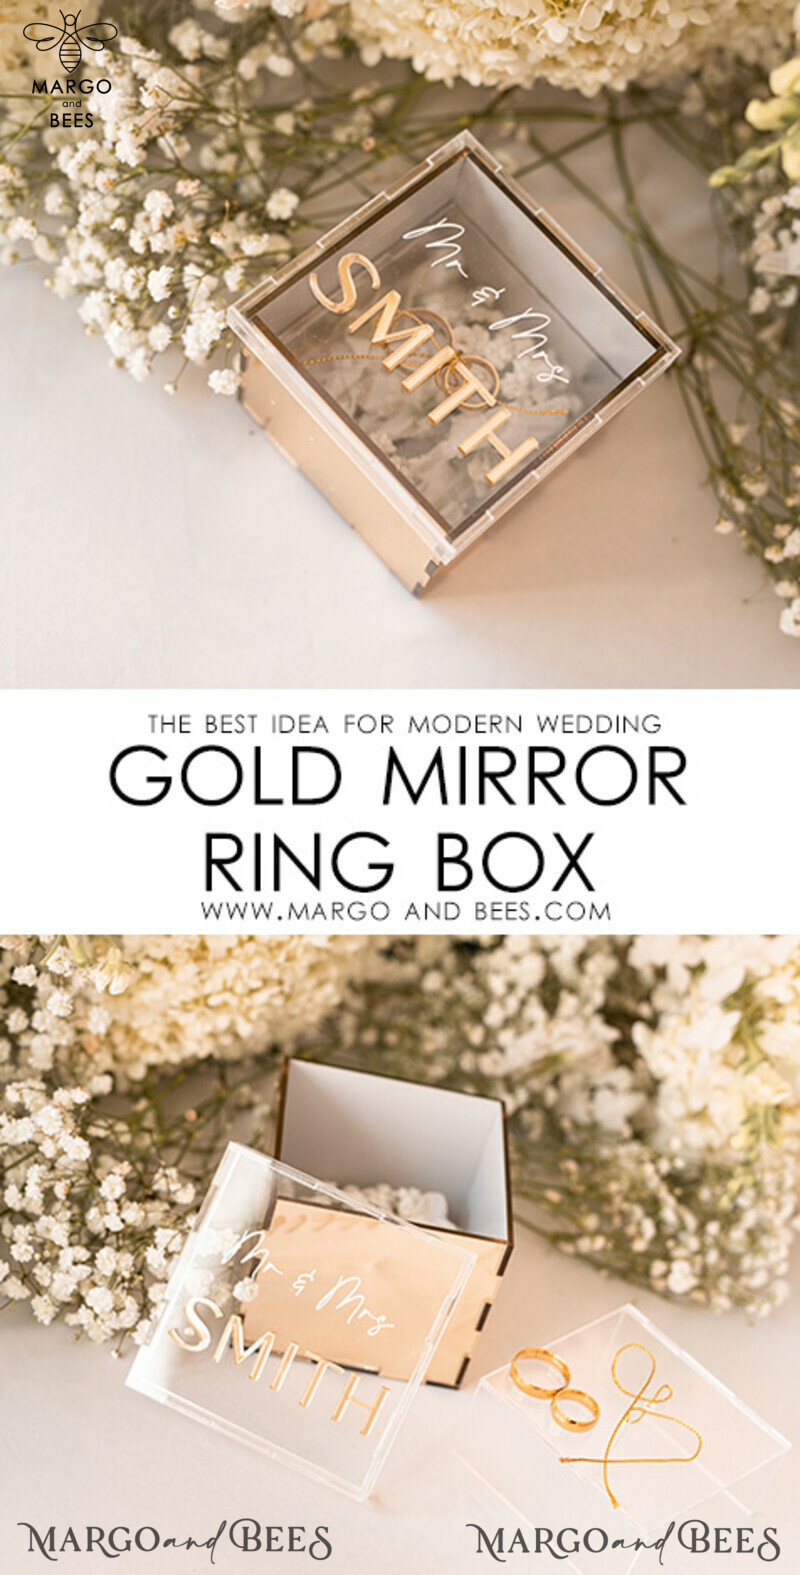 Ring Box for Wedding Ceremony 3 rings, mirror Acrylic Golden Wedding Ring Box for ceremony, Boho Glam Wedding Ring Boxes, Luxury Acrylic Gold Ring box double Custom Colors-4